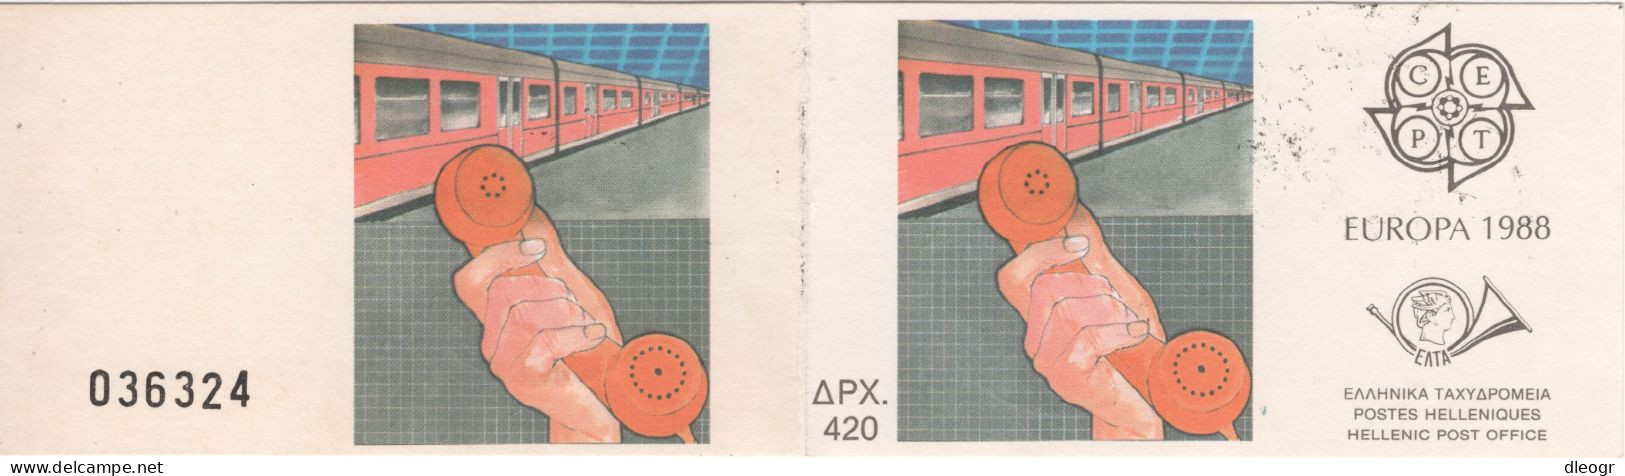 Greece 1988 Europa Cept Imperforate Booklet Used - Booklets